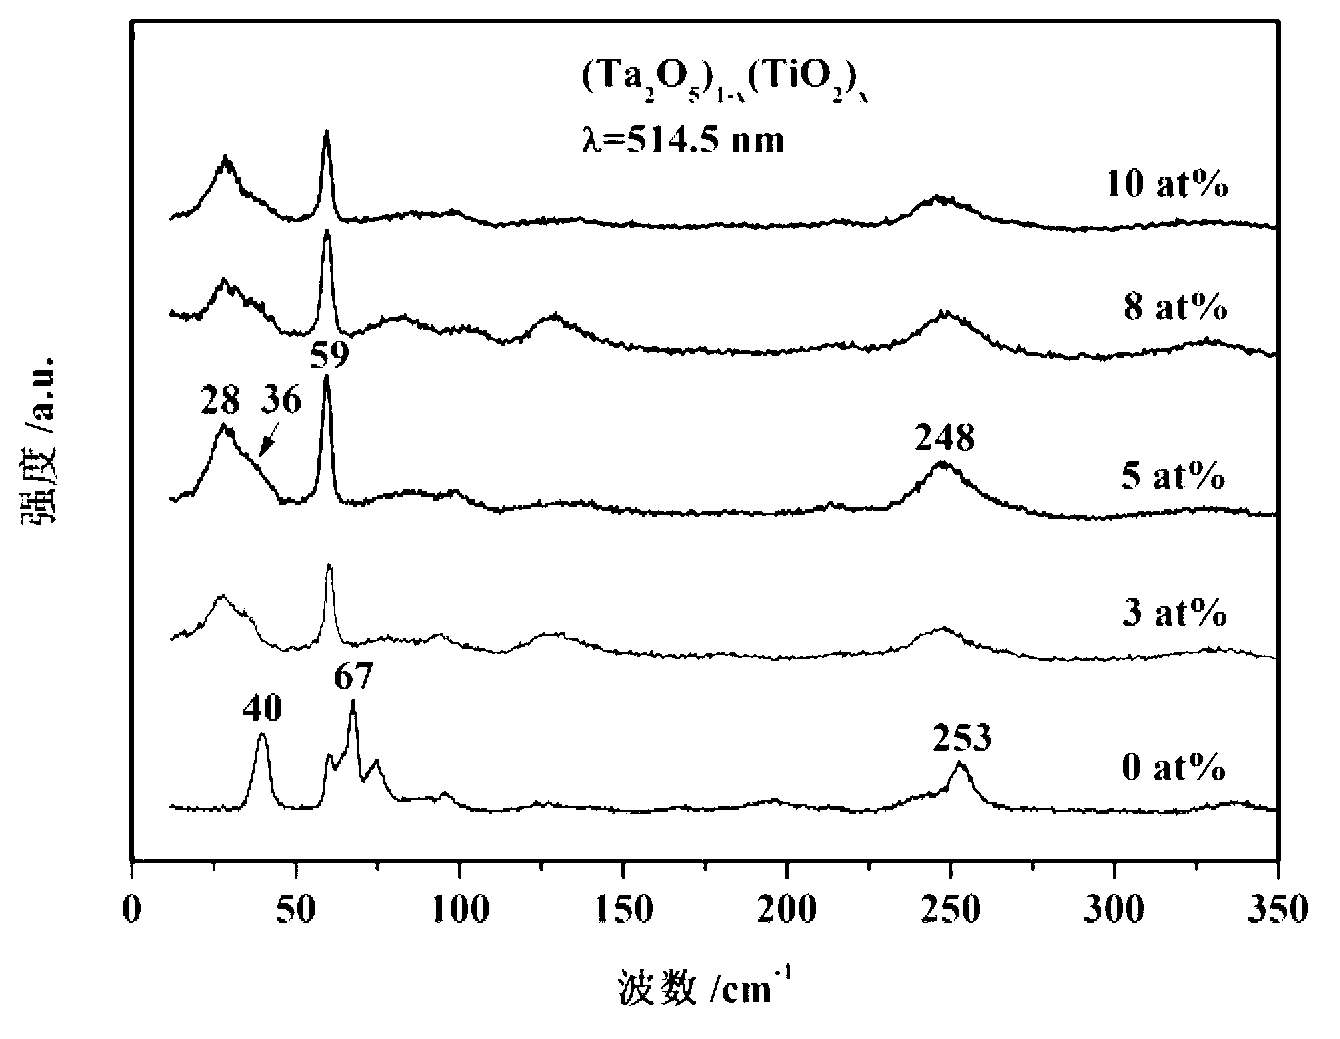 Method for crucible-free rapid growth of centimeter magnitude Ti:Ta2O5 crystals